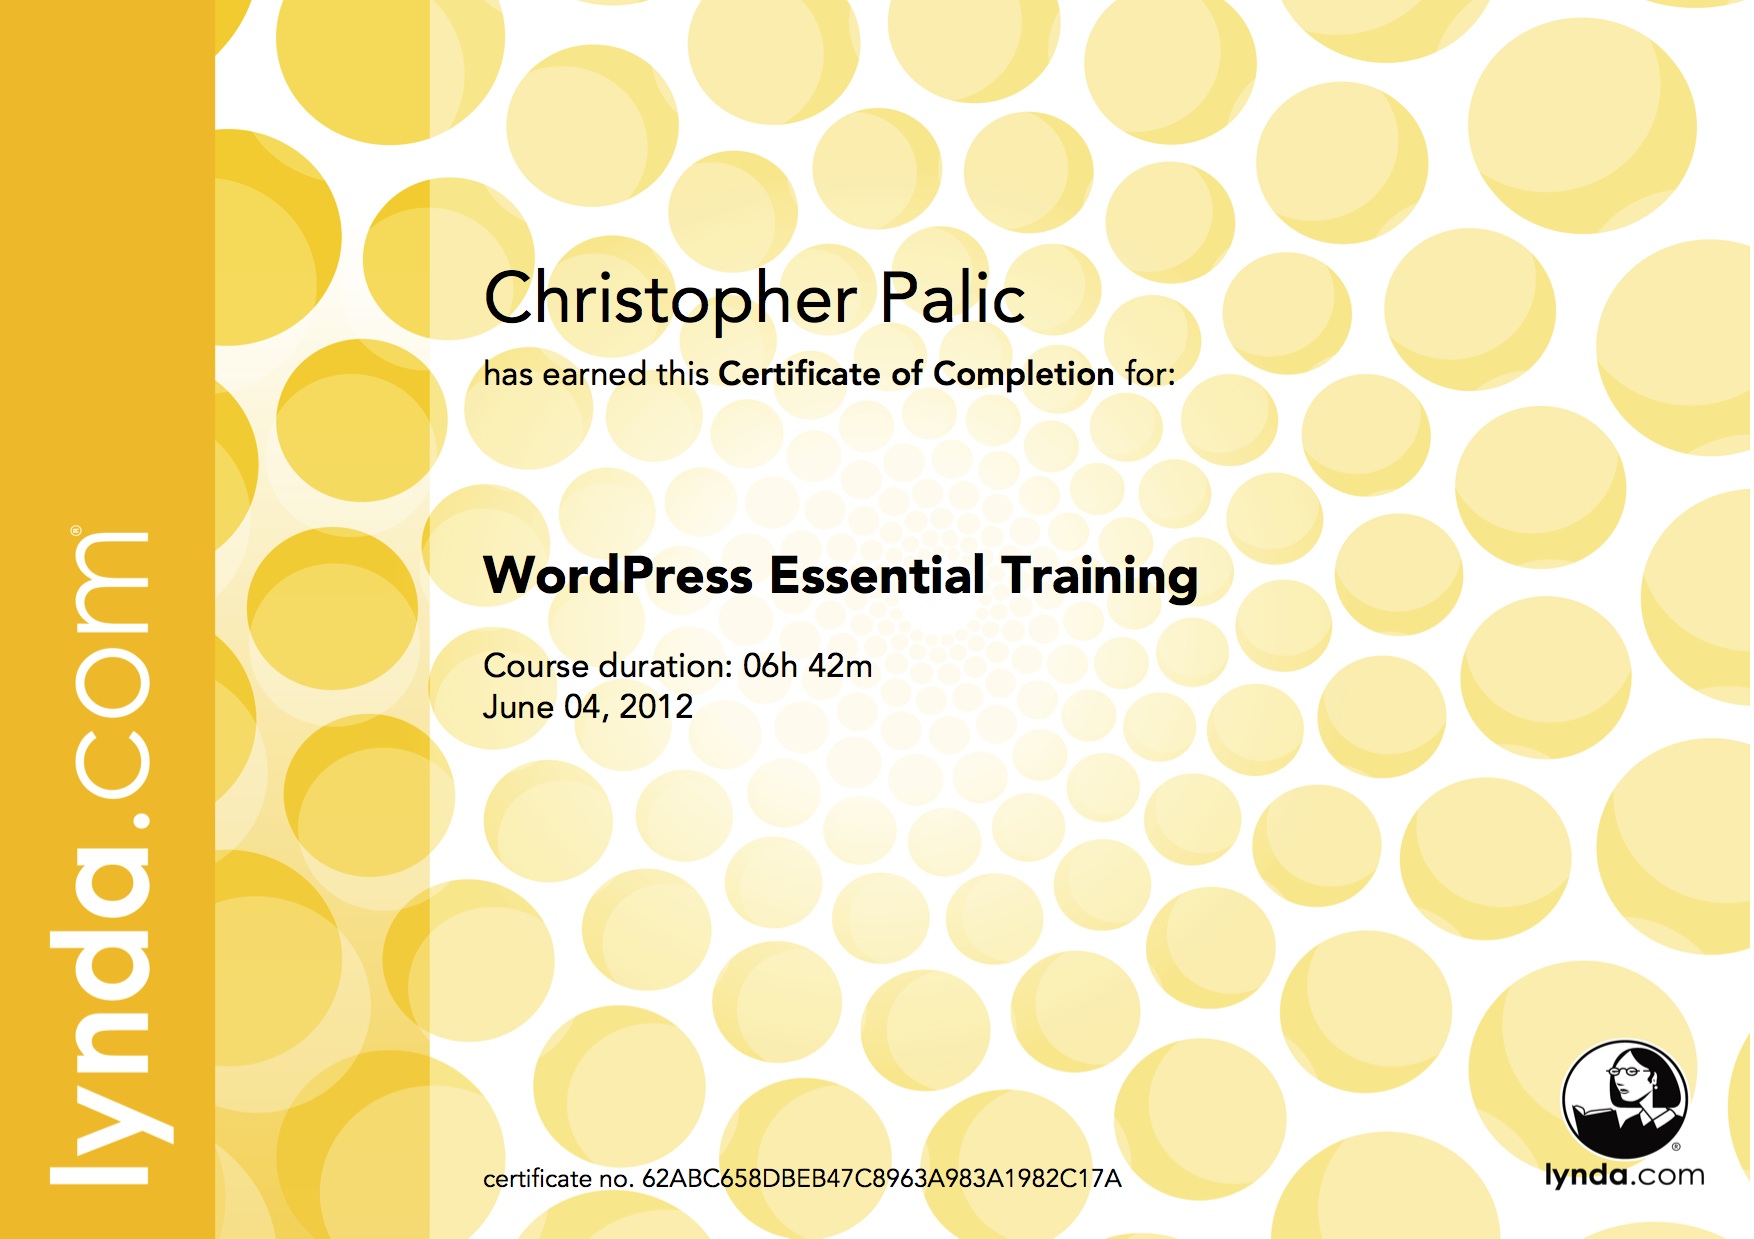 WordPress Essential Training - Certificate Of Completion